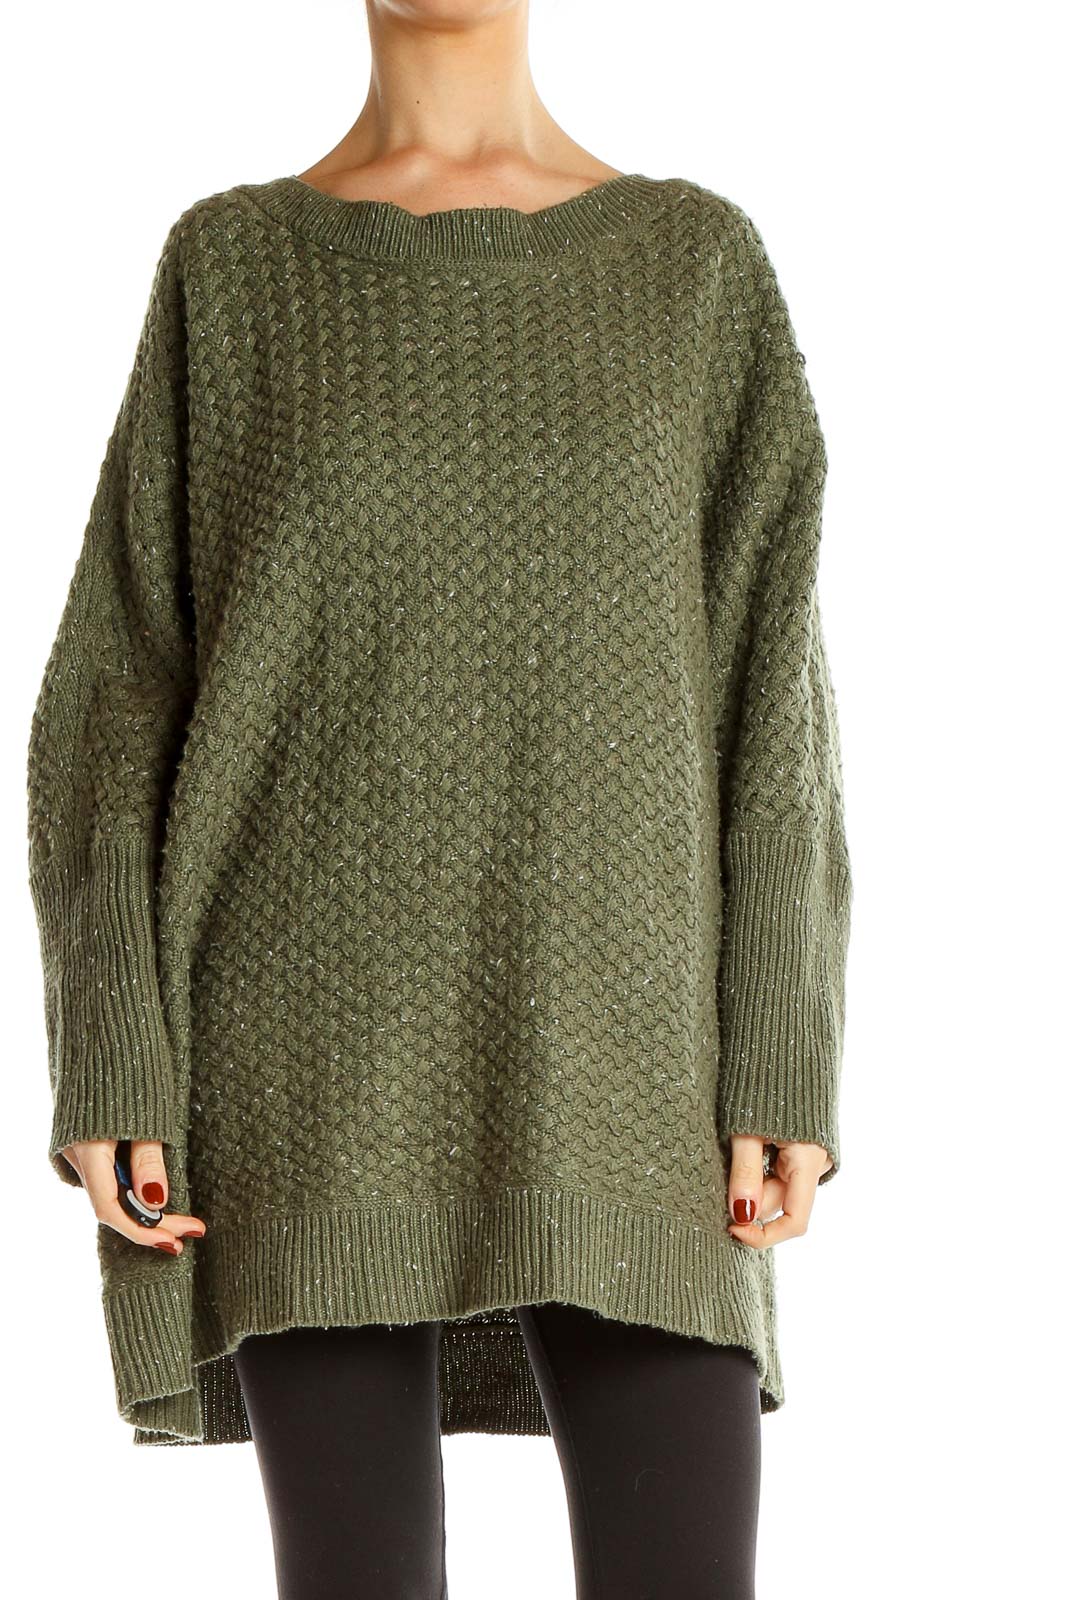 Green Cableknit Sweater Front